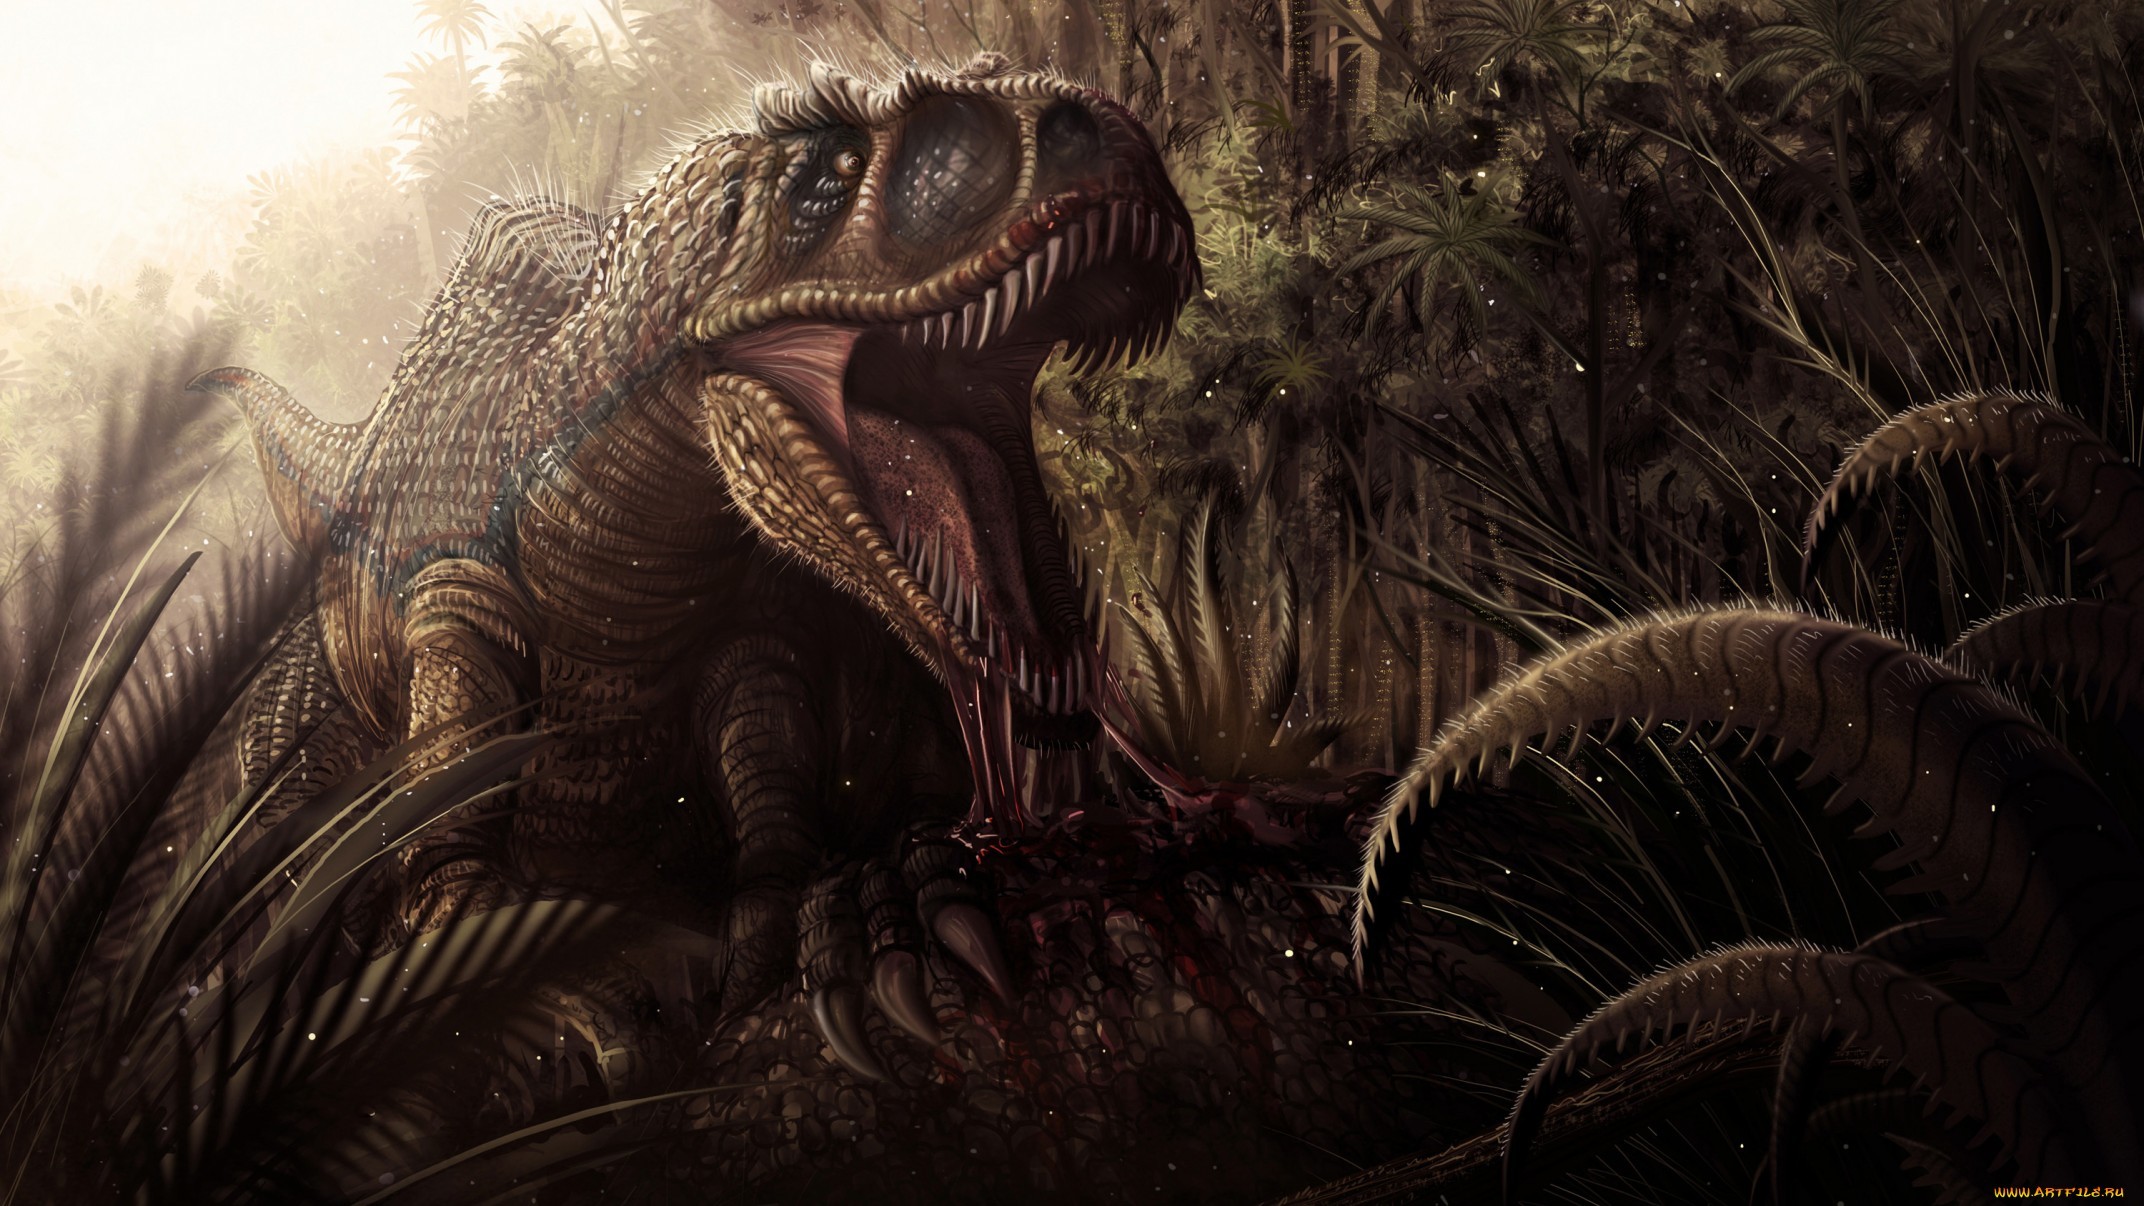 2144x1206 These Ferocious Dinosaur Wallpapers Will Rampage on Your Desktop